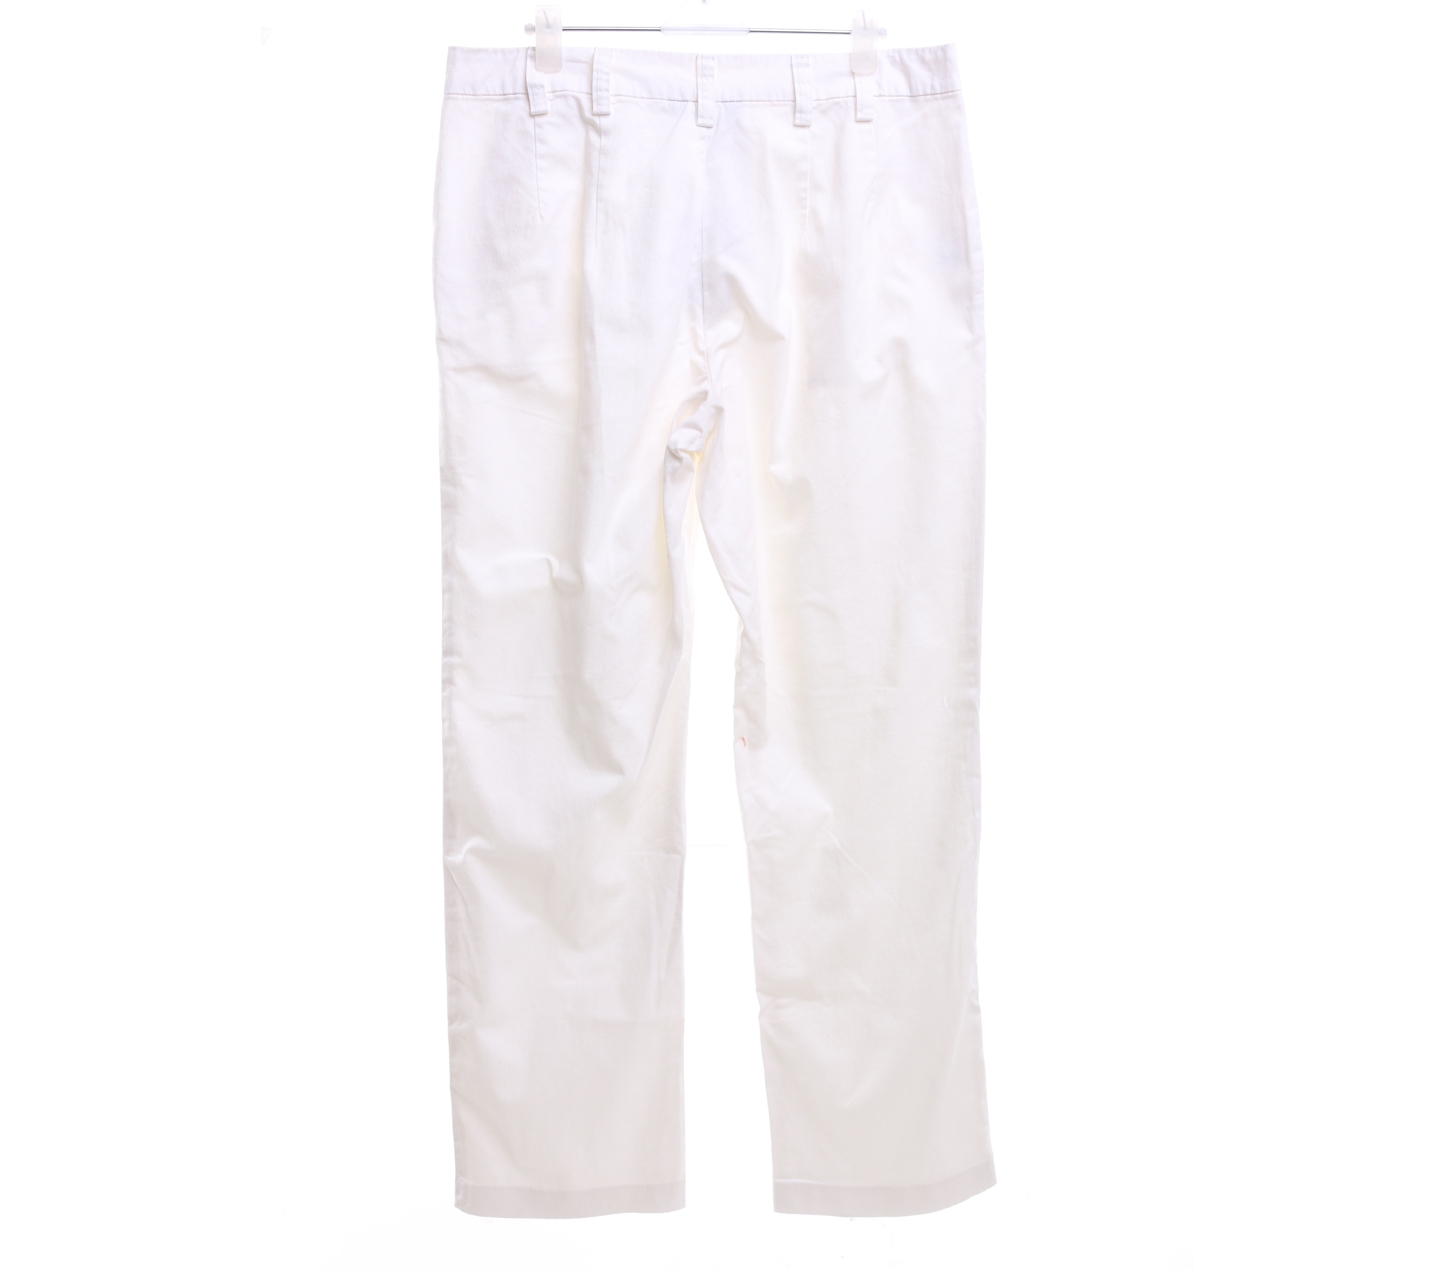 P.S. The Spirit Of Personal Style Off White Long Pants